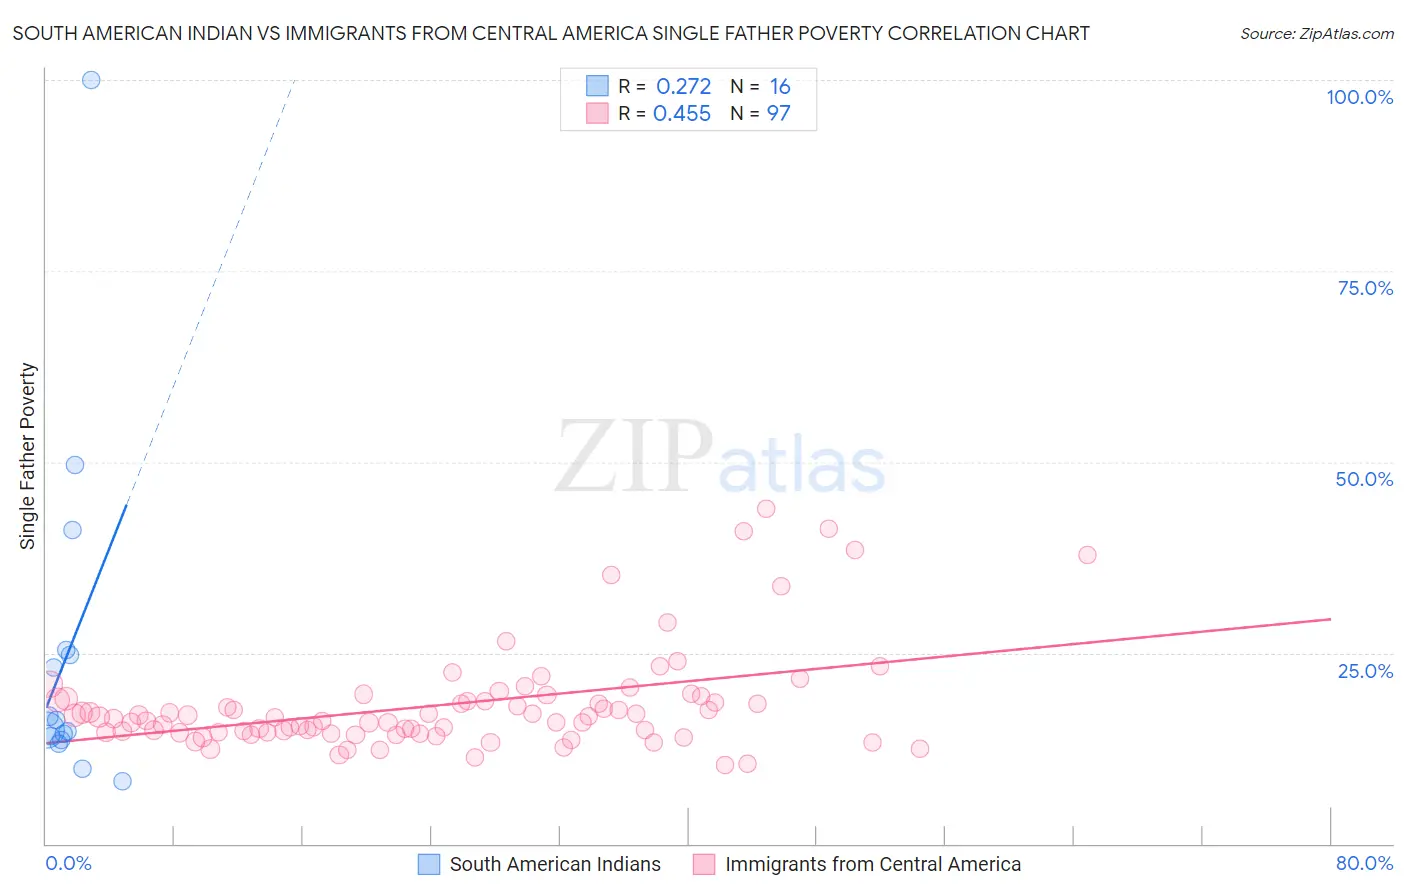 South American Indian vs Immigrants from Central America Single Father Poverty